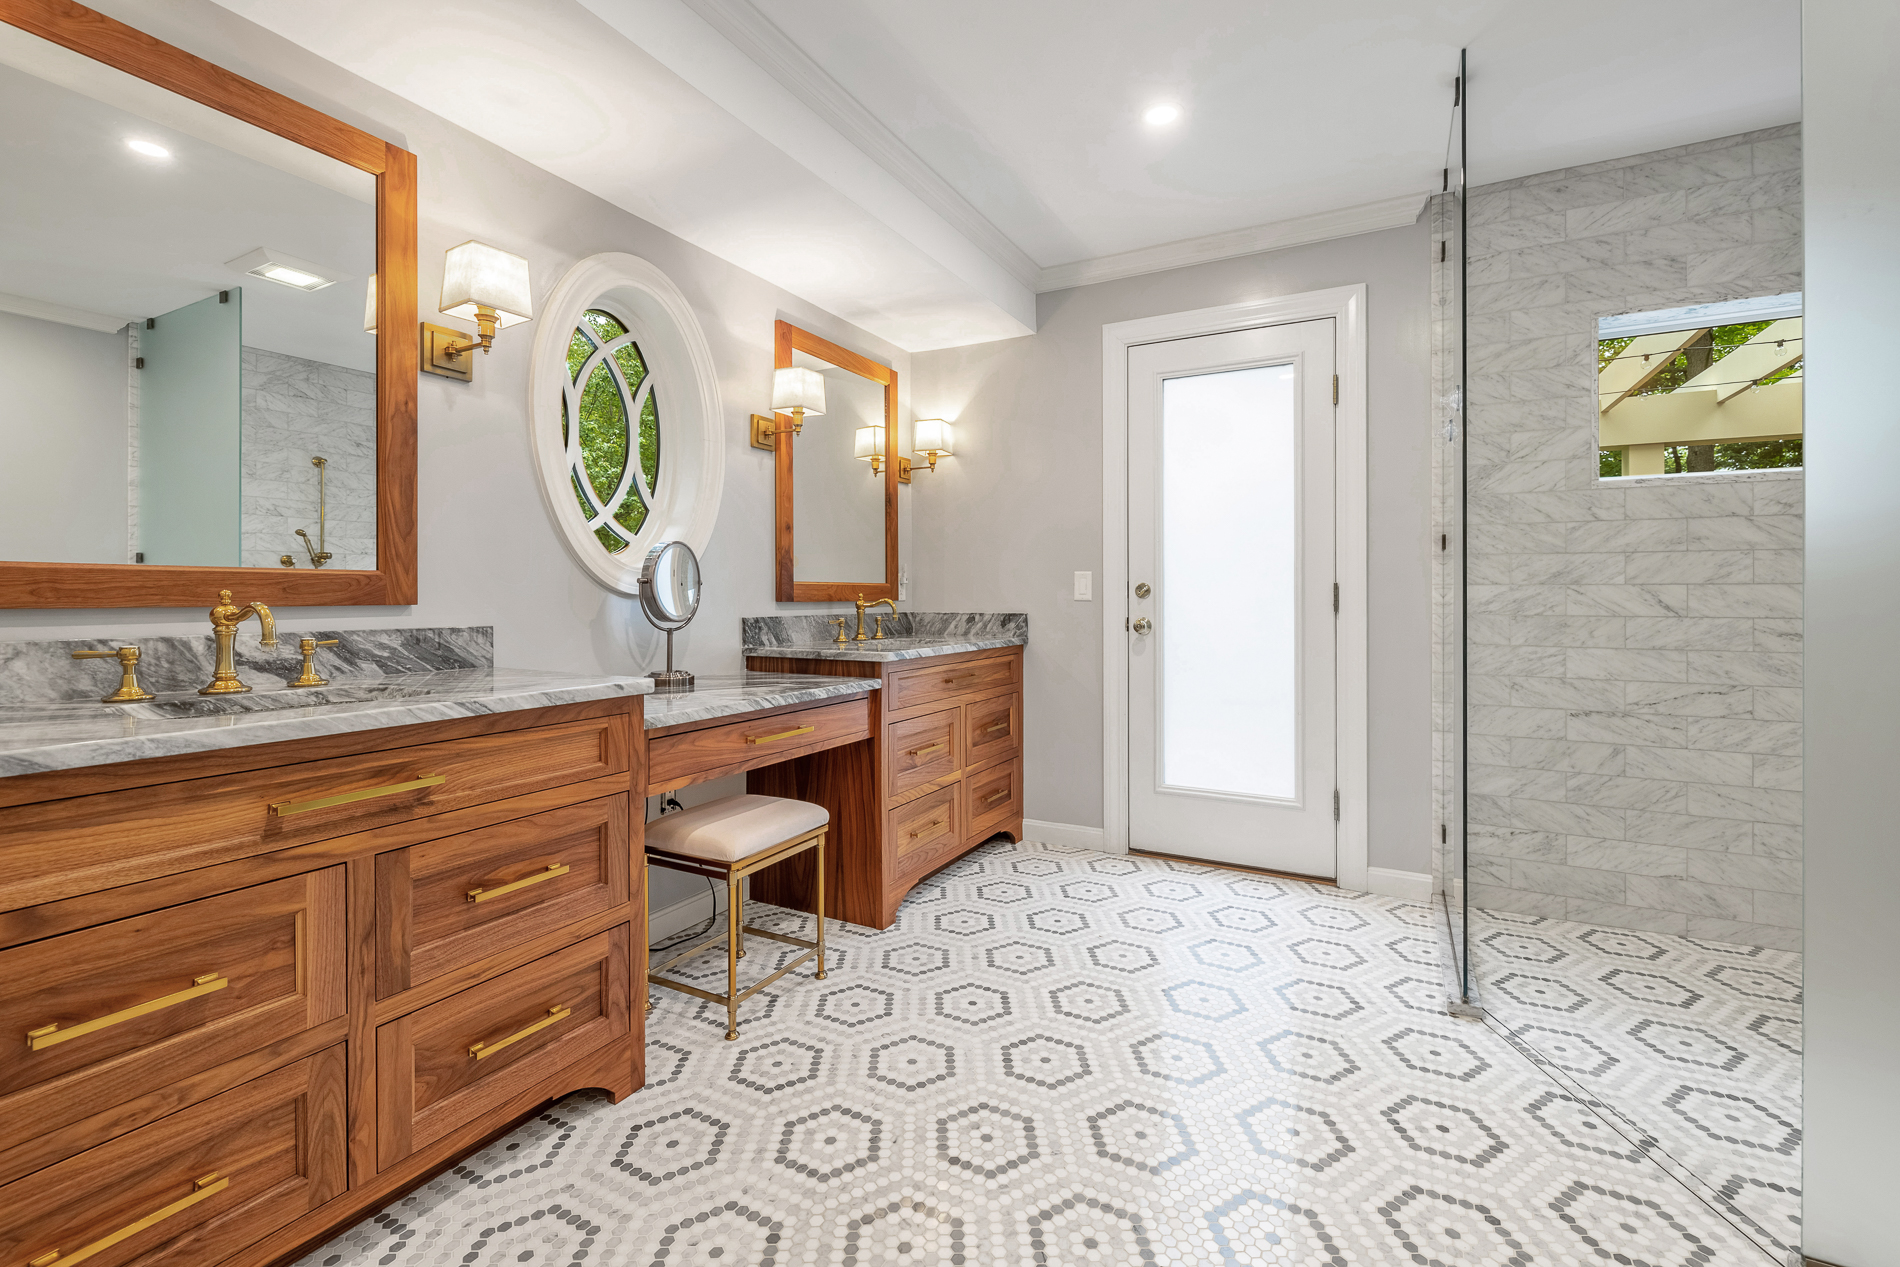 Large remodeled bathroom with an accessible walk-in shower, patterned tile floors, and woodgrain dual vanity.